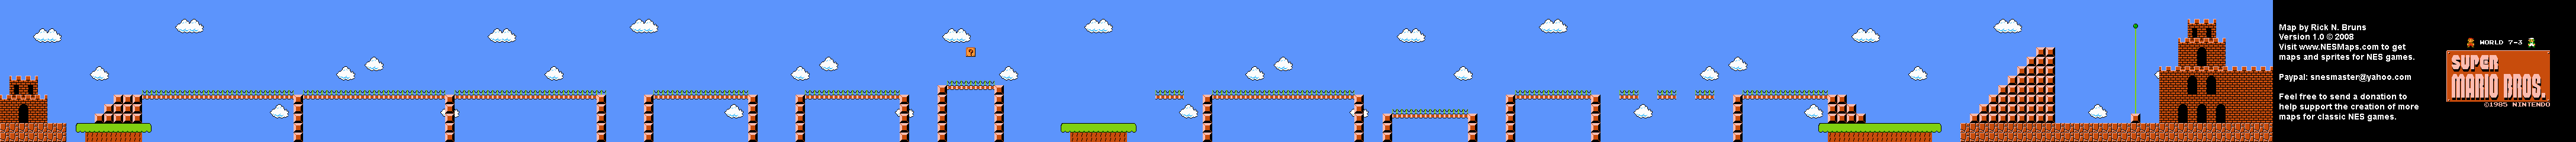 Super Mario Brothers - World 7-3 Nintendo NES Background Only Map